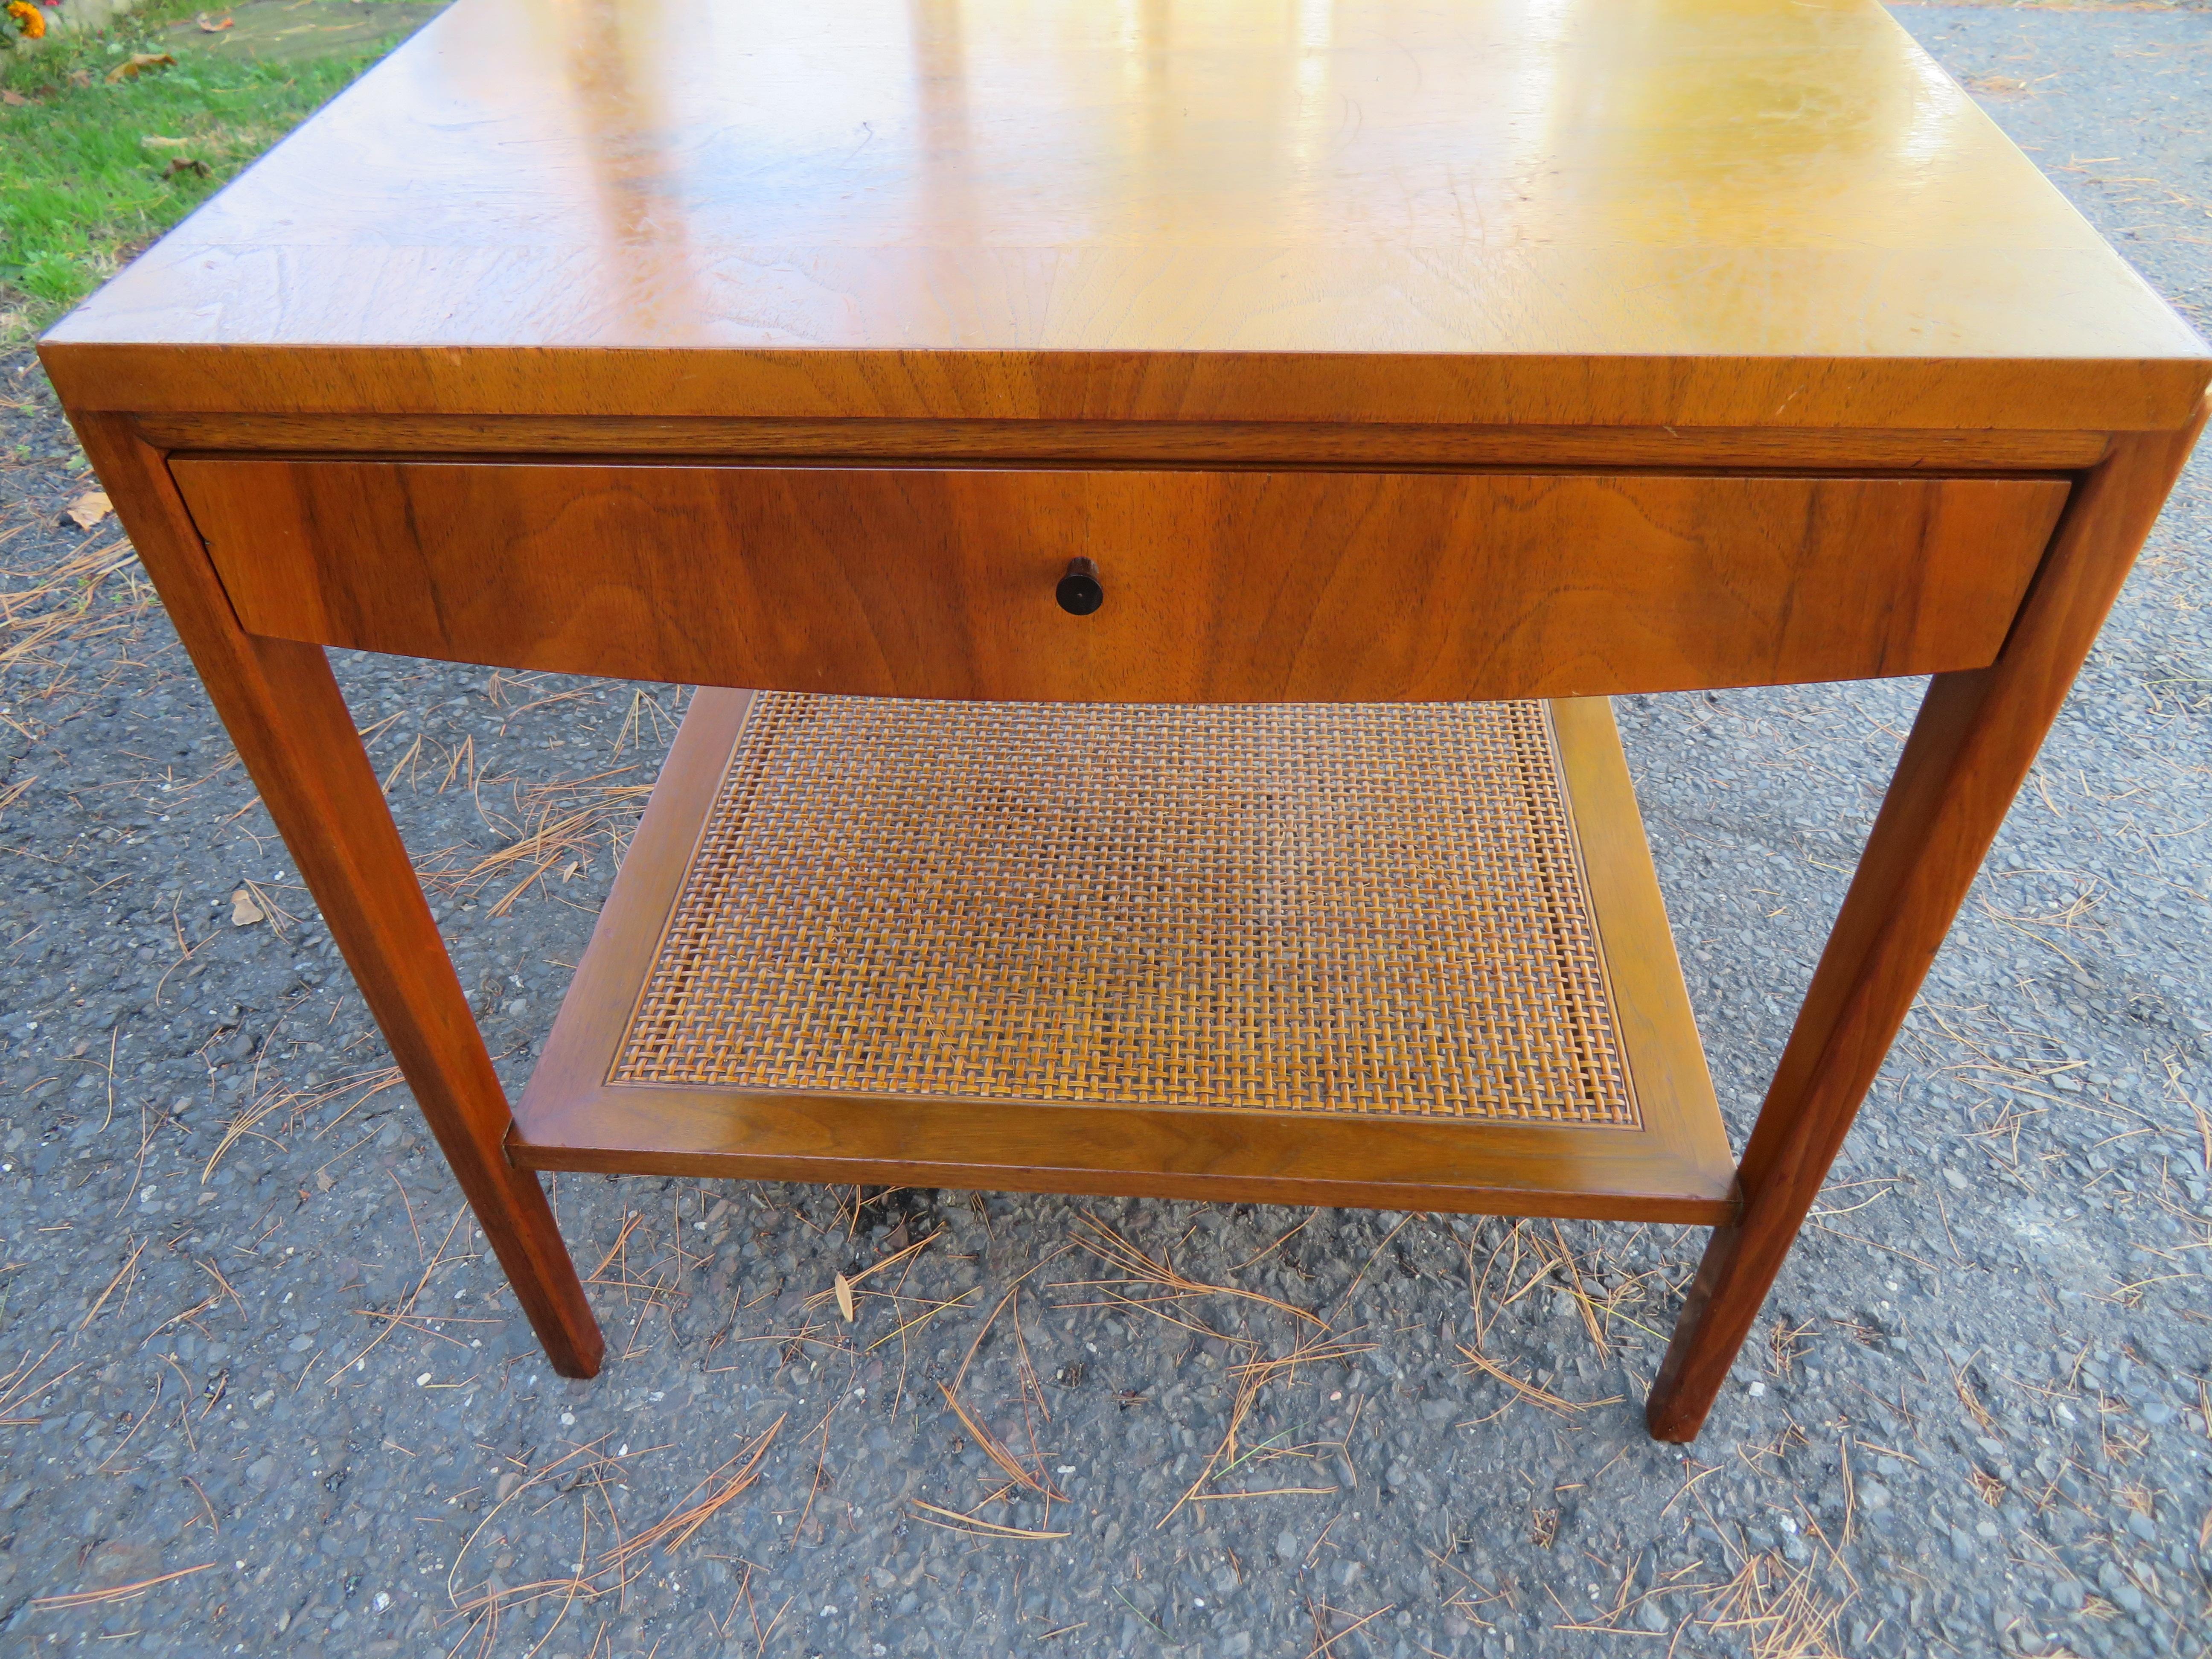 Lovely Widdicomb walnut and cane two-tier, single-drawer end table. Sleek and simple design with a floating drawer cabinet with a banded bordered top. The lower tier is caned and in wonderful vintage condition. We love to use this kind of table next